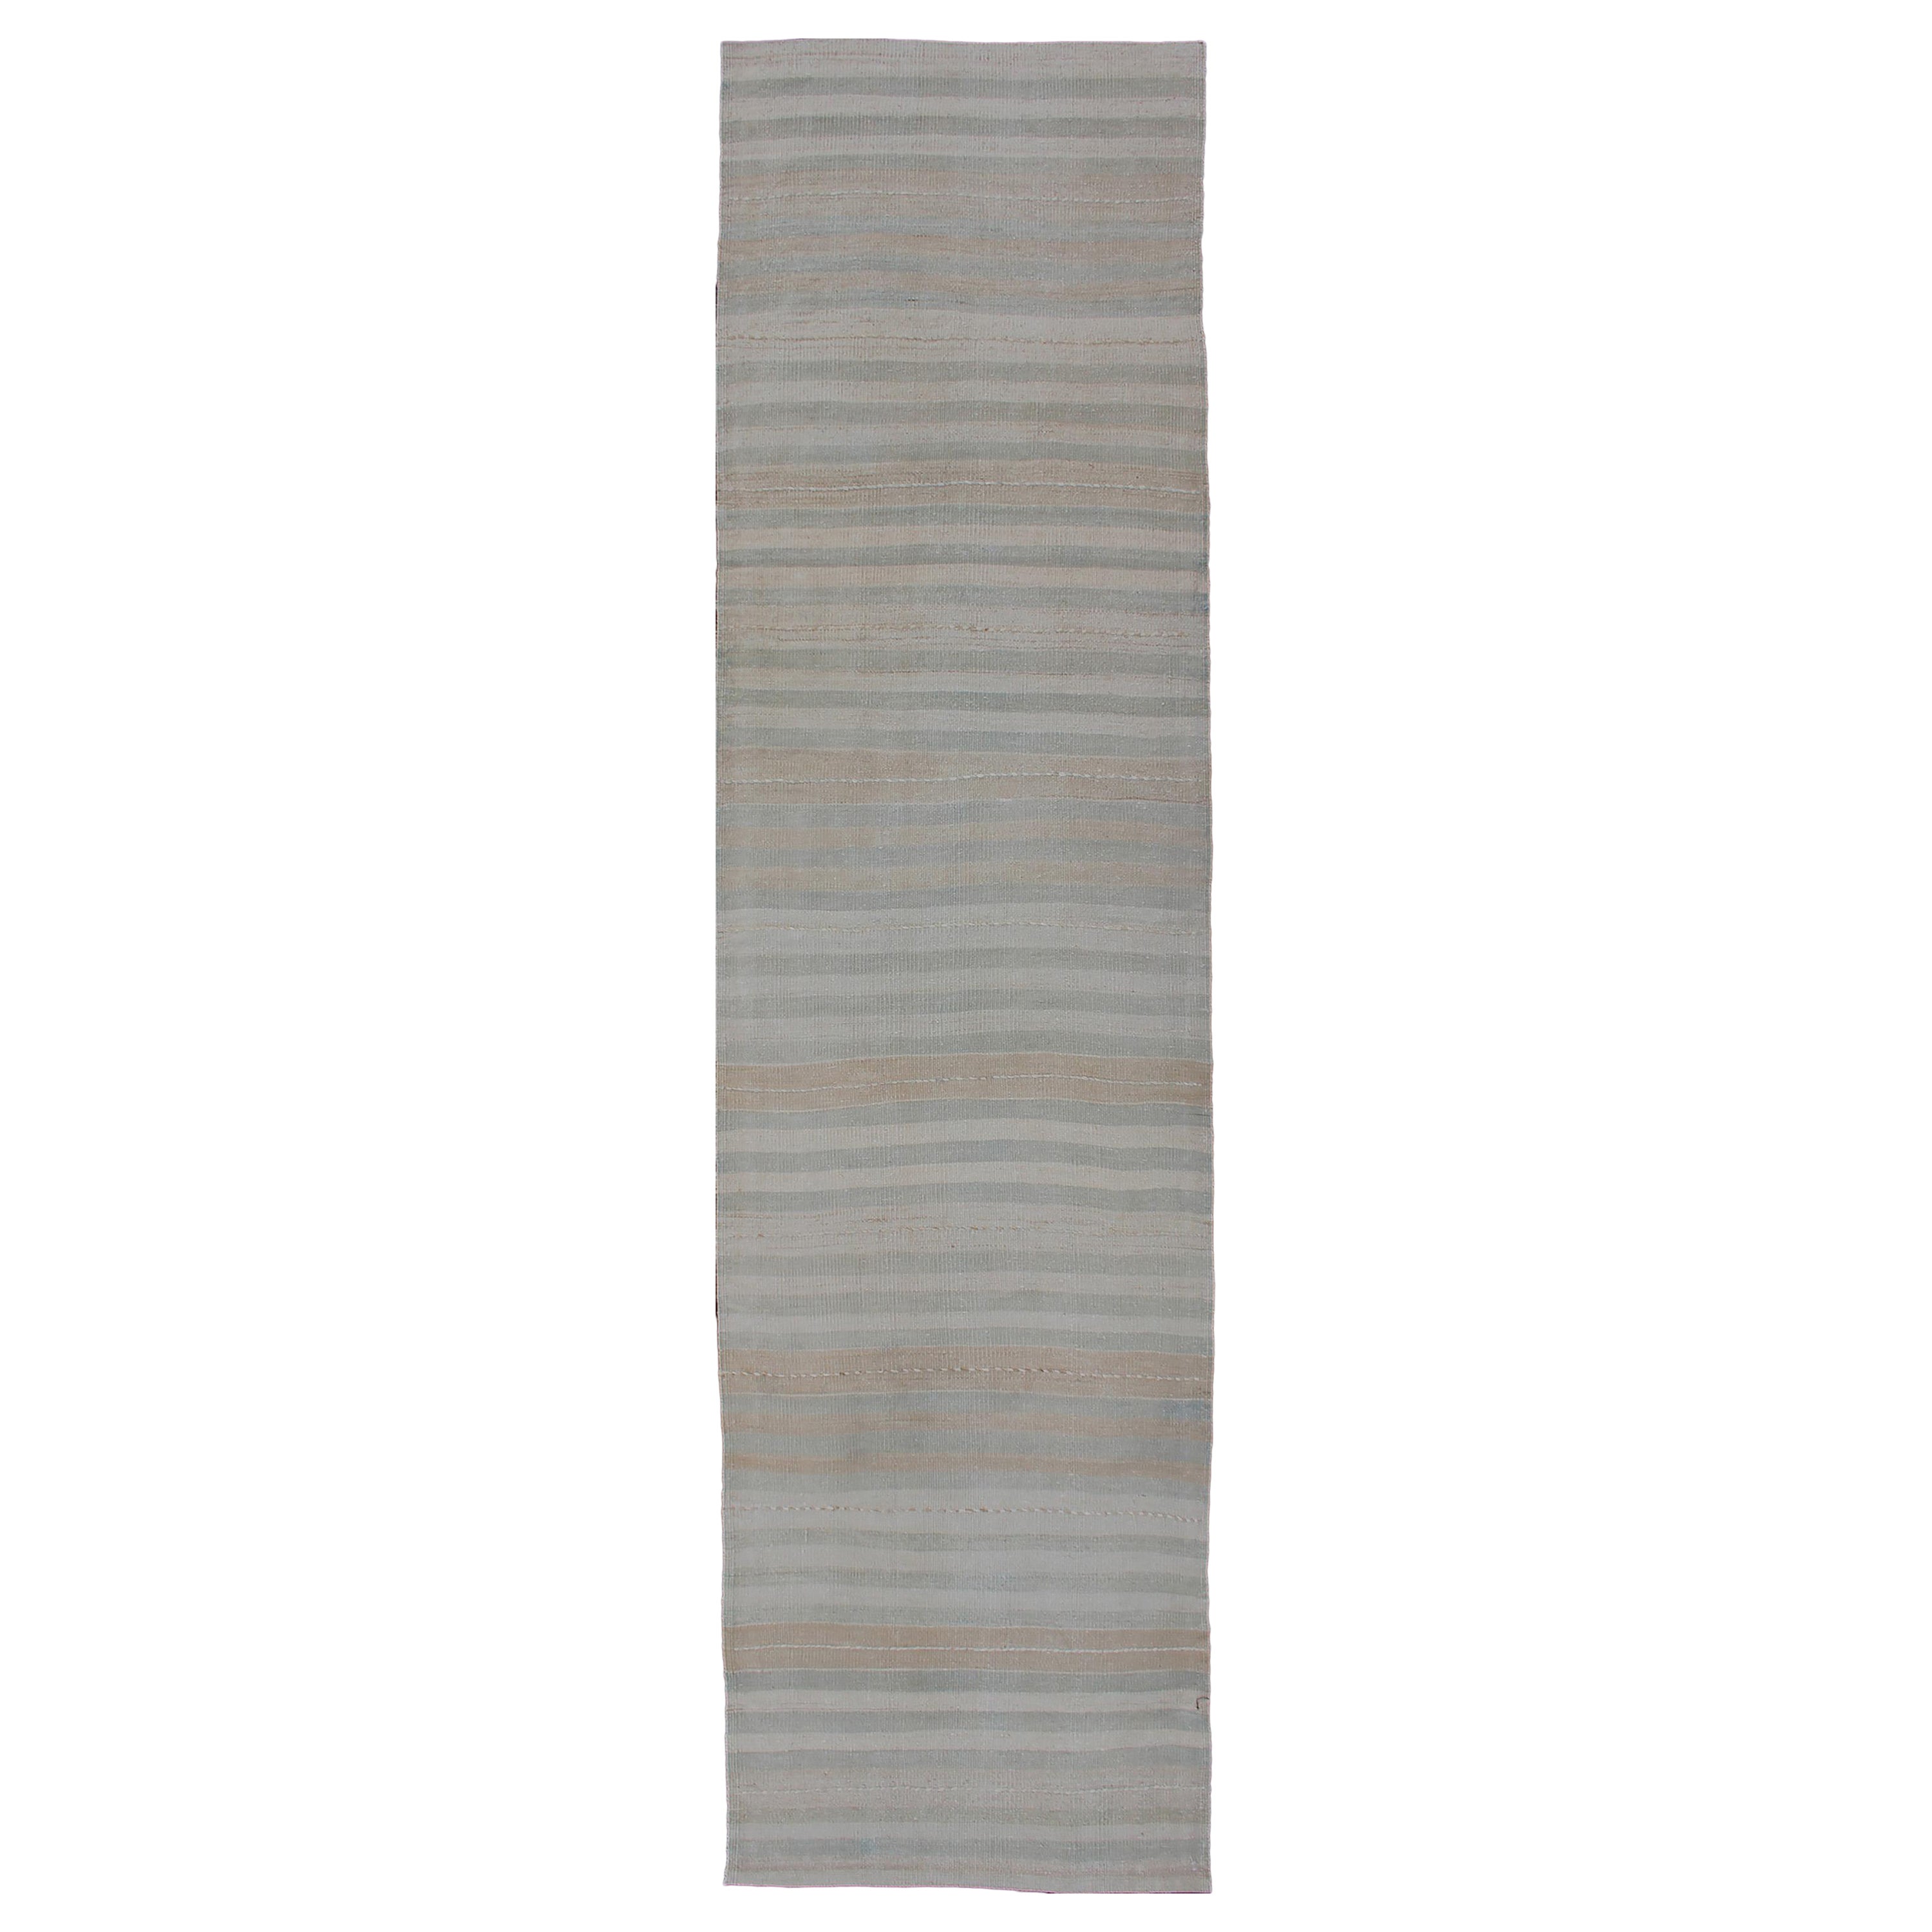 Vintage Turkish Kilim Runner with a Stripe and Modern Design in Neutral Tones For Sale